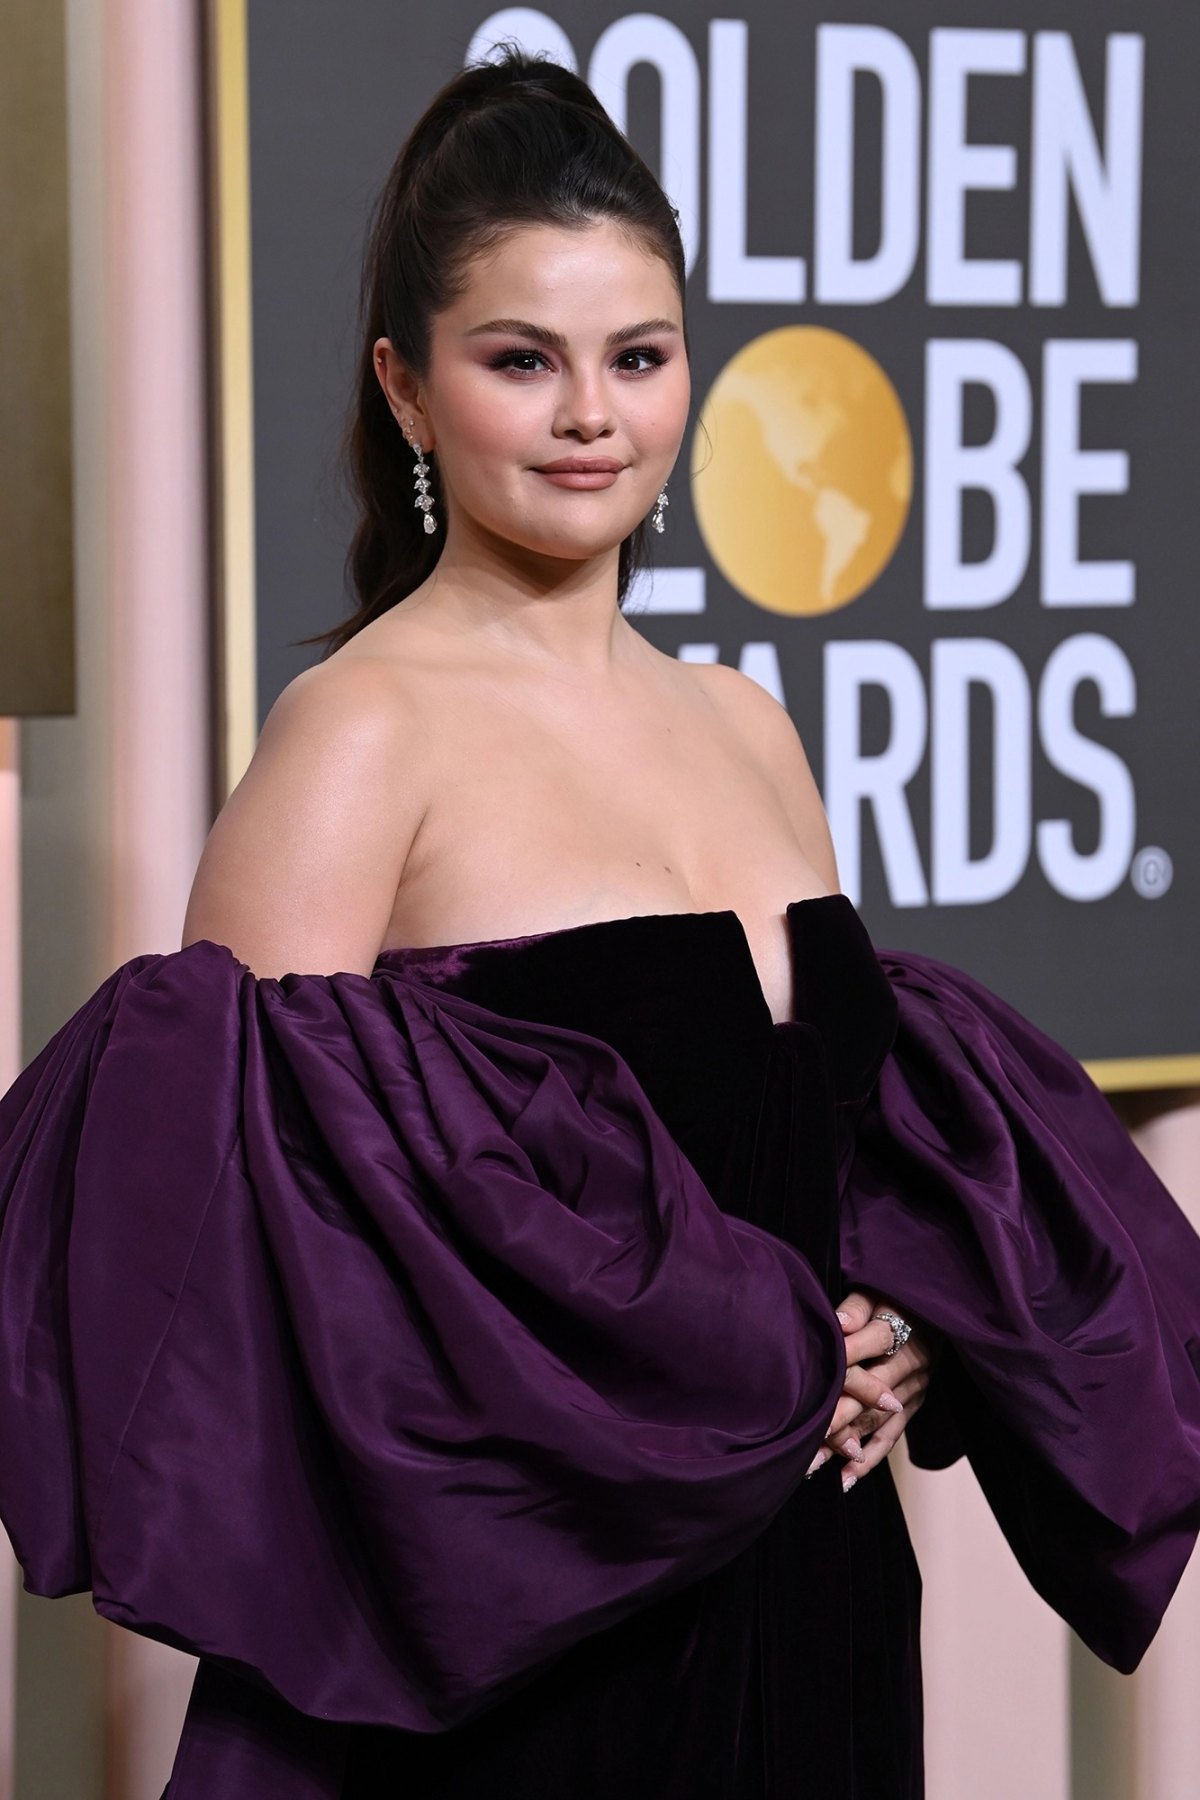 Selena Gomez Says She Lied When She Said Body-Shaming Didn't Bother Her